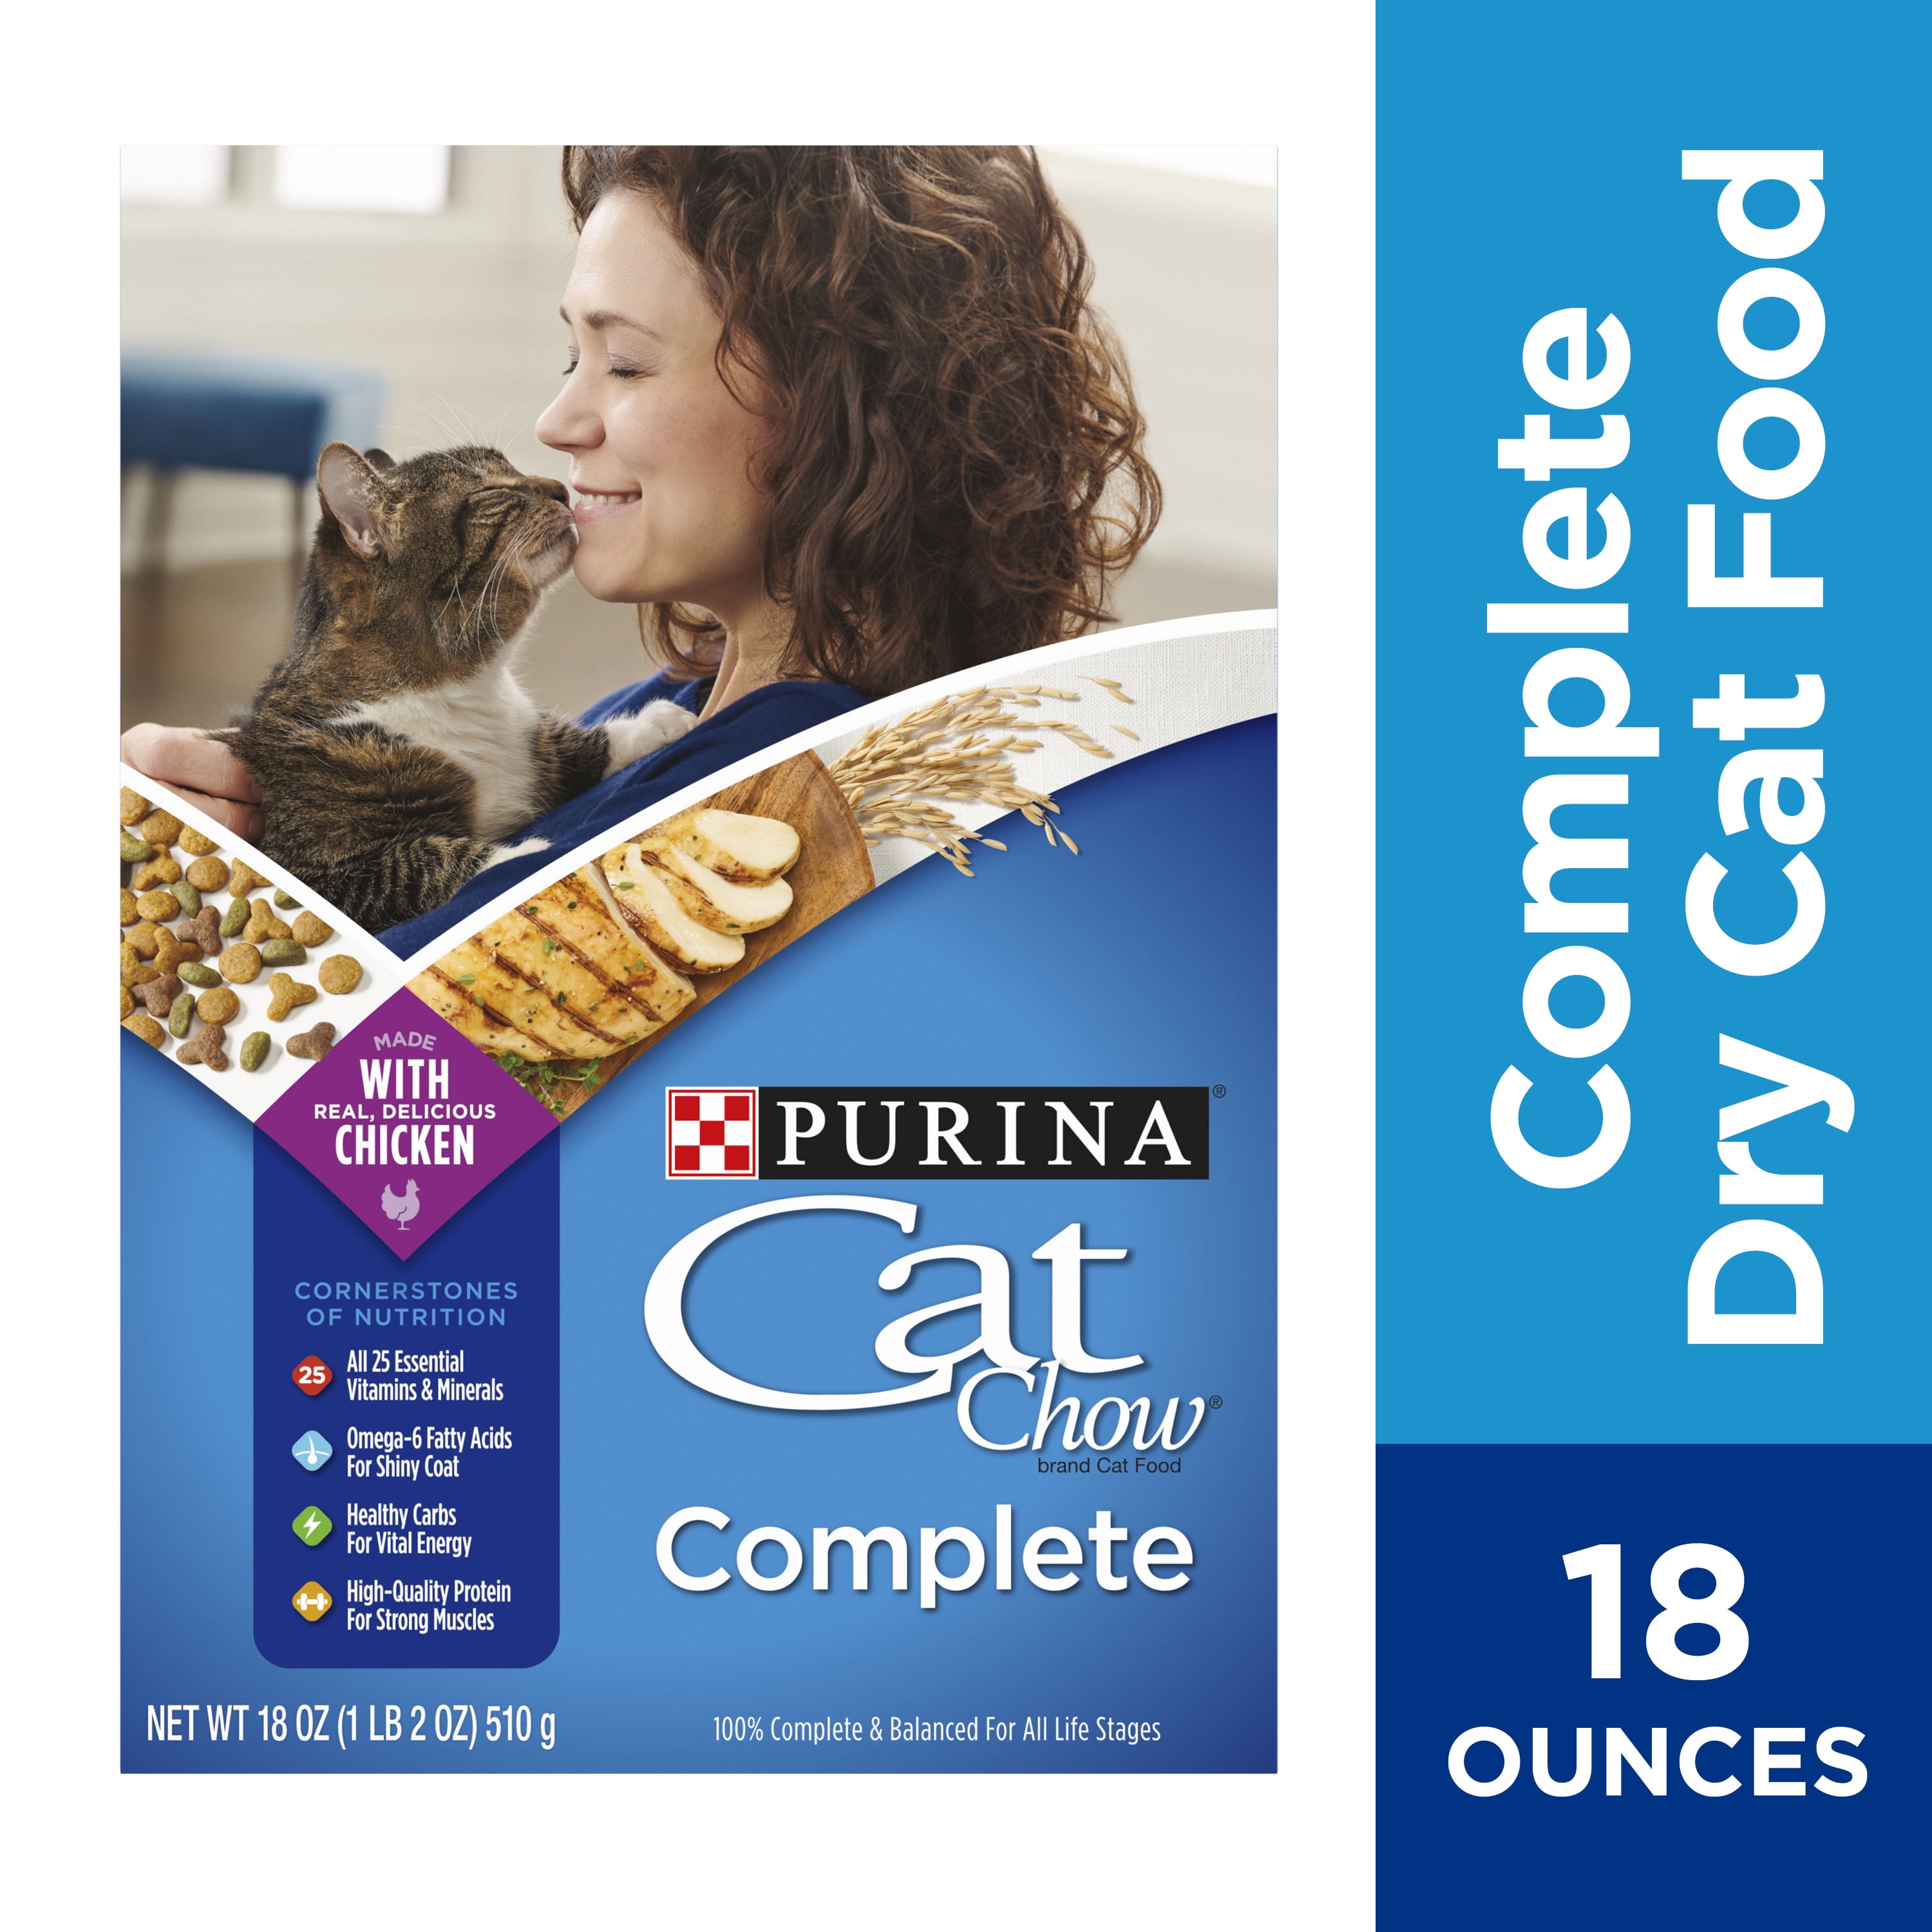 Purina Cat Chow High Protein Dry Cat Food, Complete, 18 oz. Box